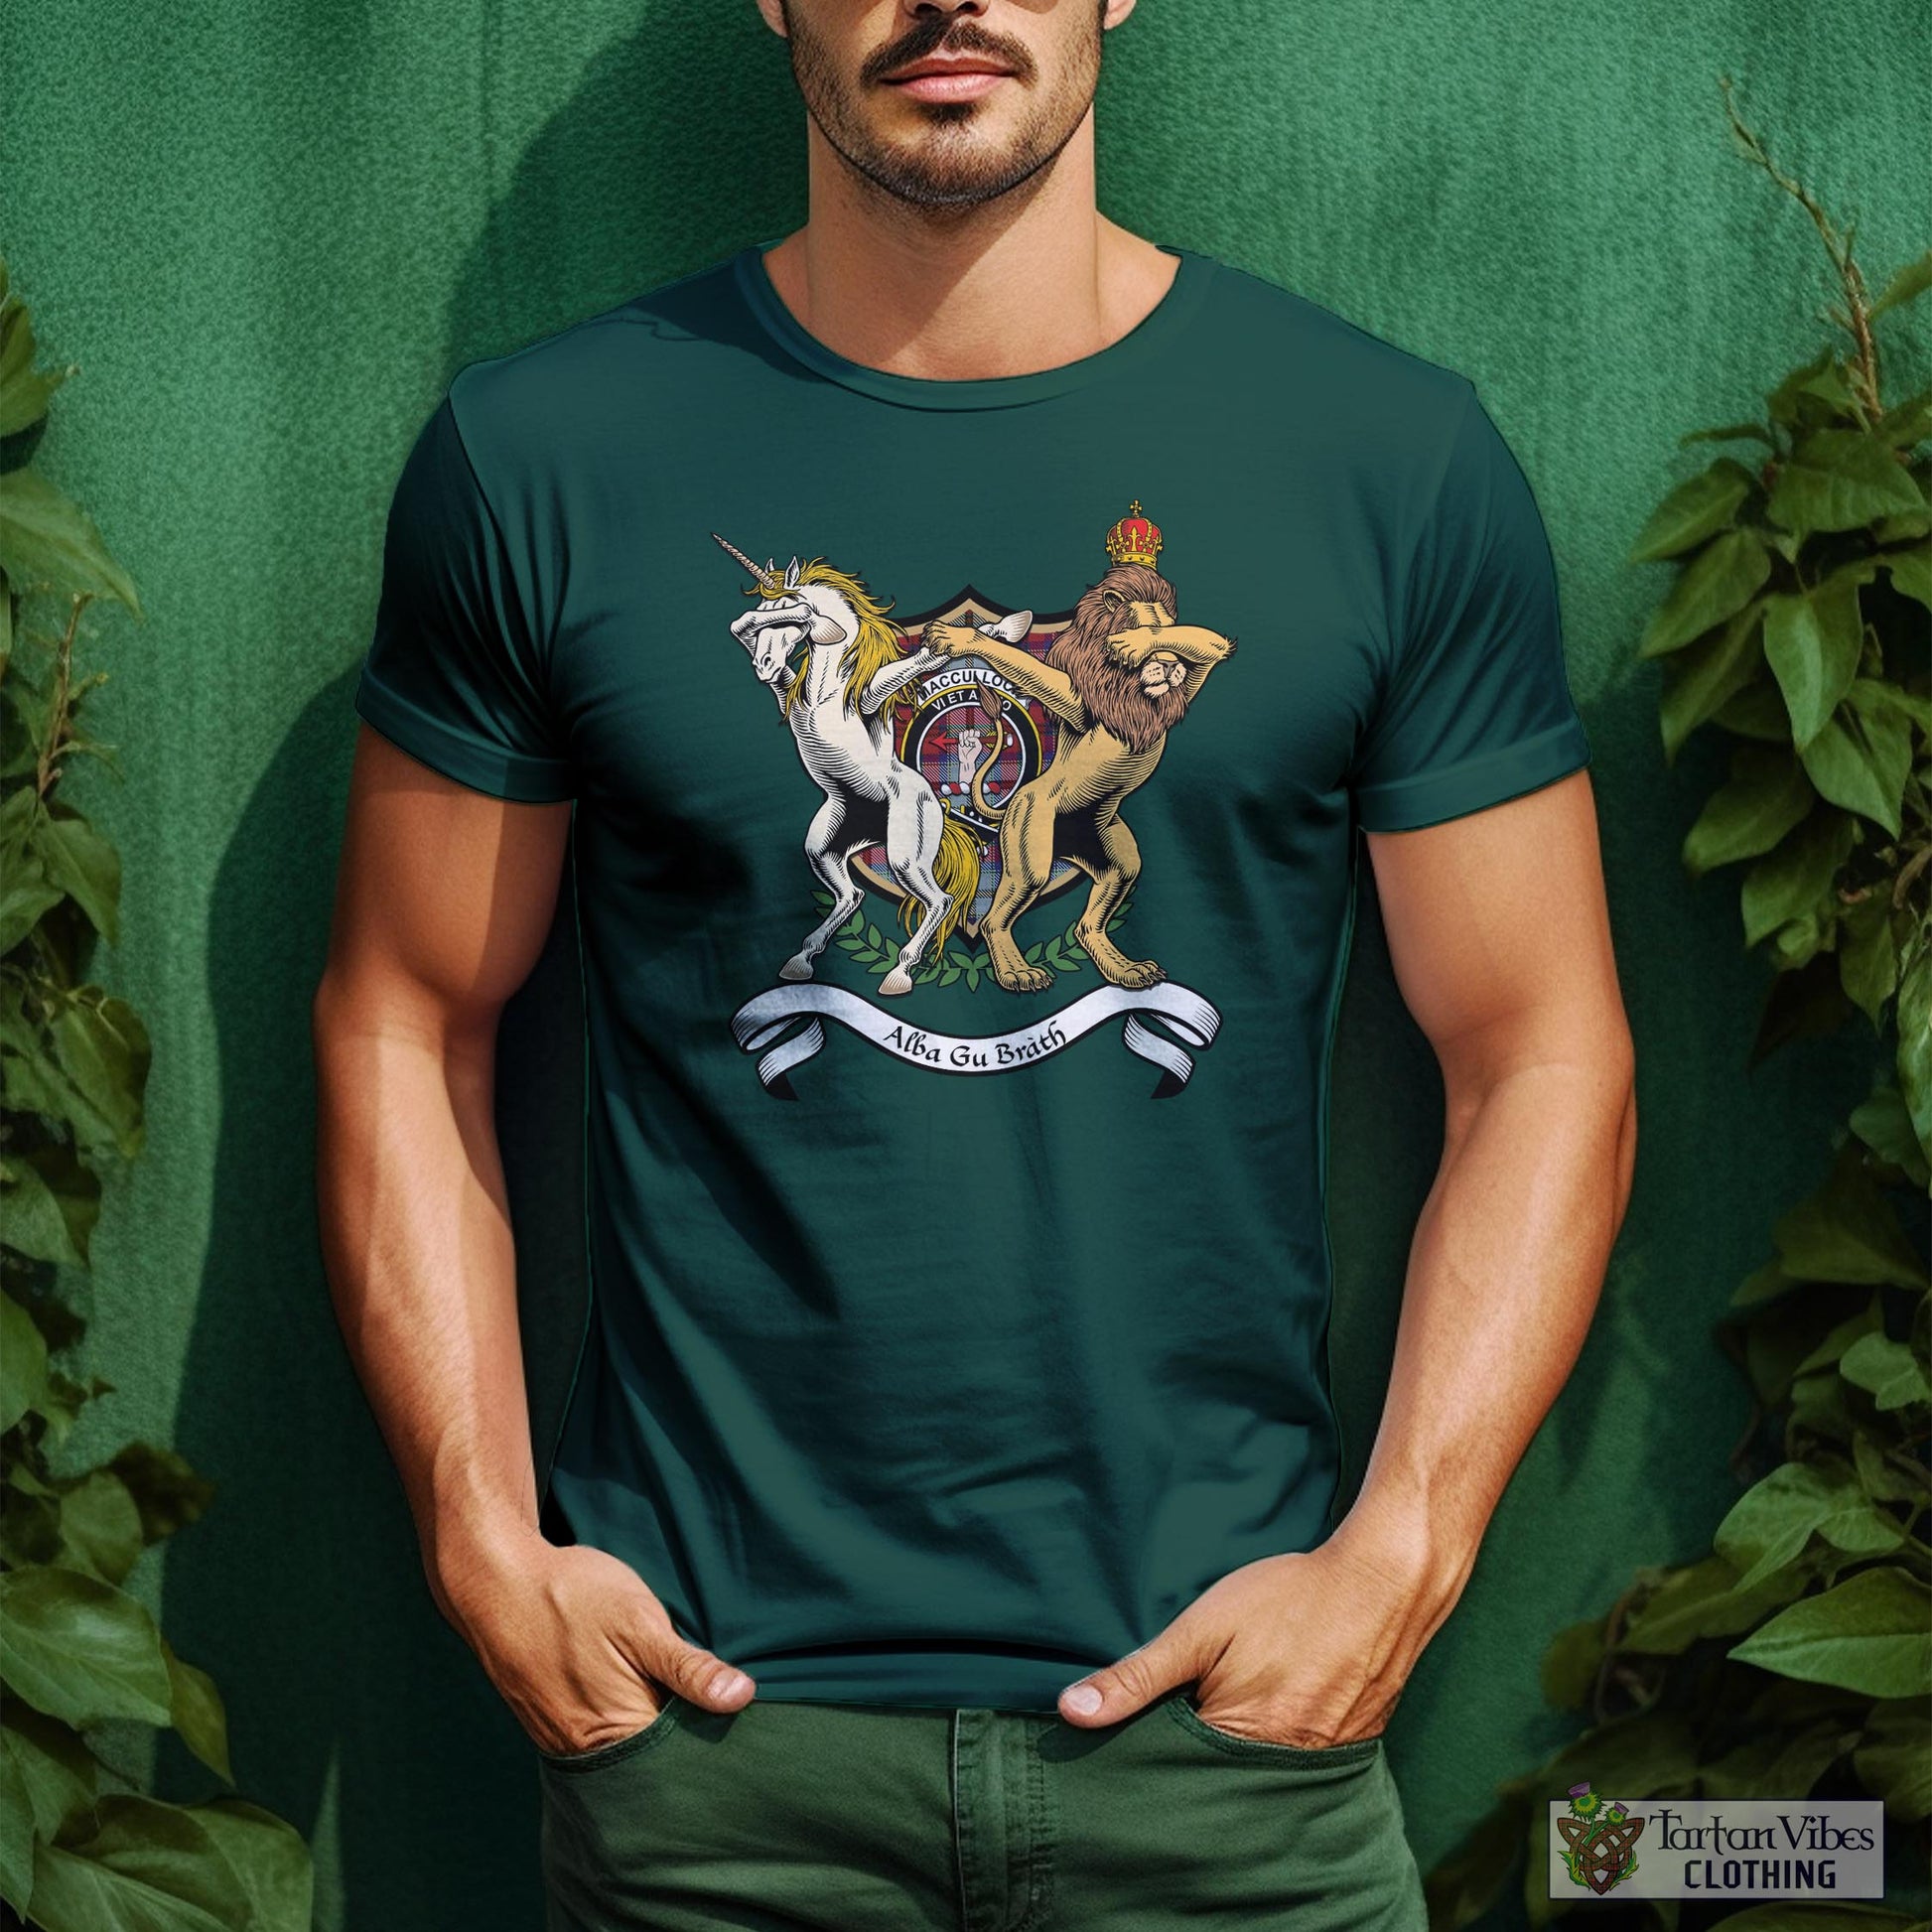 Tartan Vibes Clothing MacCulloch Dress Family Crest Cotton Men's T-Shirt with Scotland Royal Coat Of Arm Funny Style